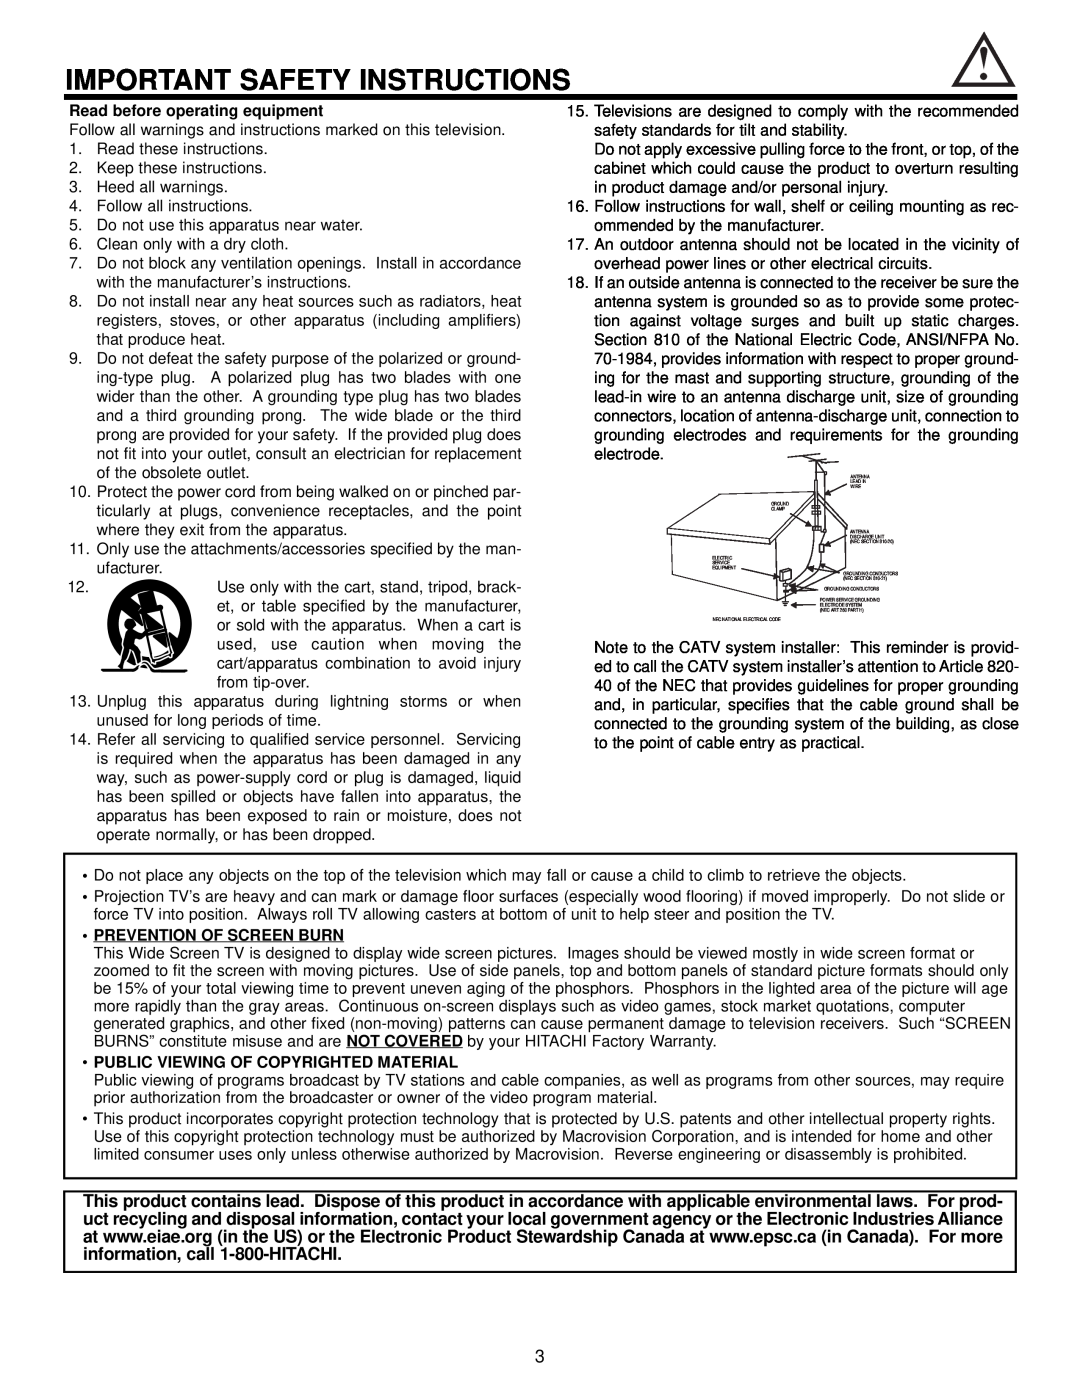 Hitachi 57F510 Important Safety Instructions, Read before operating equipment, Prevention Of Screen Burn 